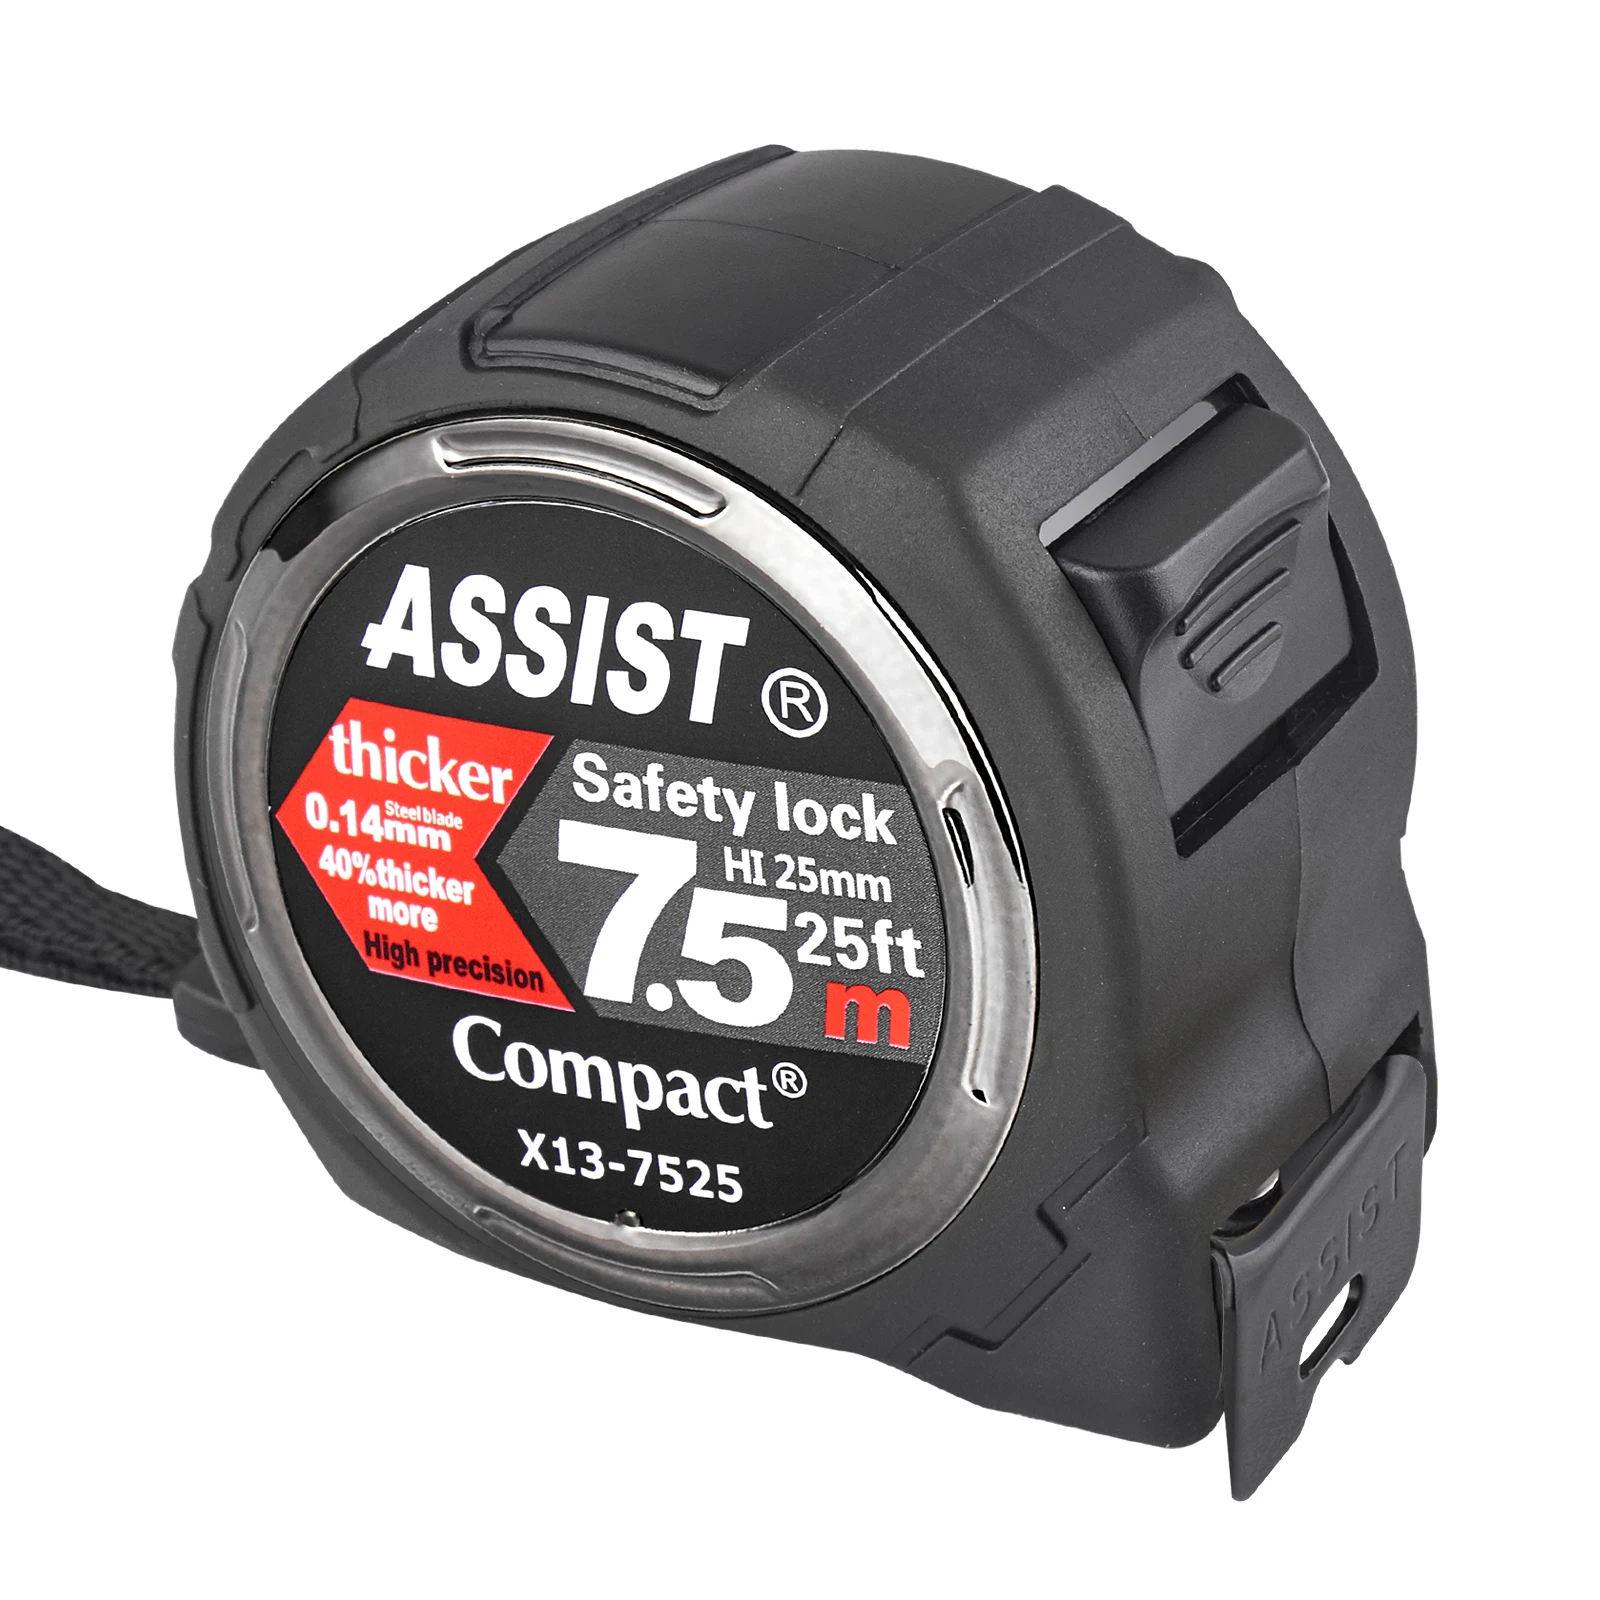 Assist High Quality Tape Stop Portable Tape Measure 3m/5m/7.5m/8m/10m Steel Measuring Tape